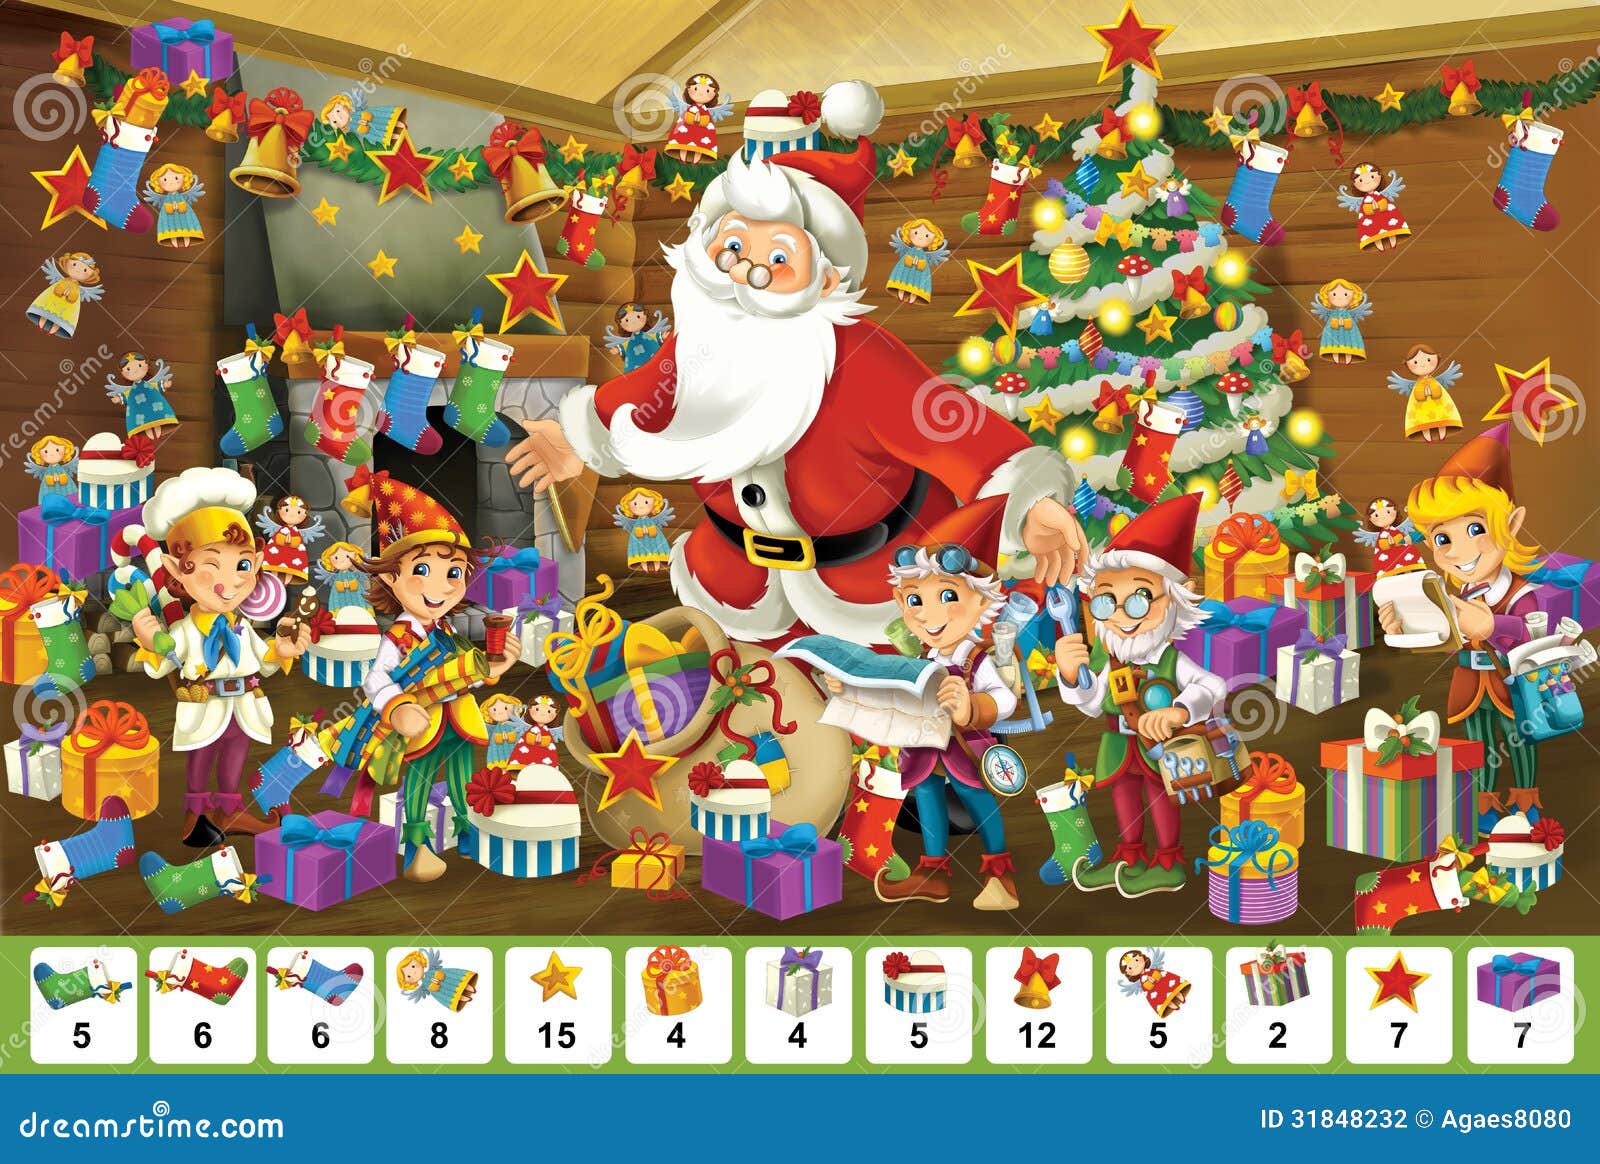 The Christmas - Board Game - Santa Claus Stock Photography 